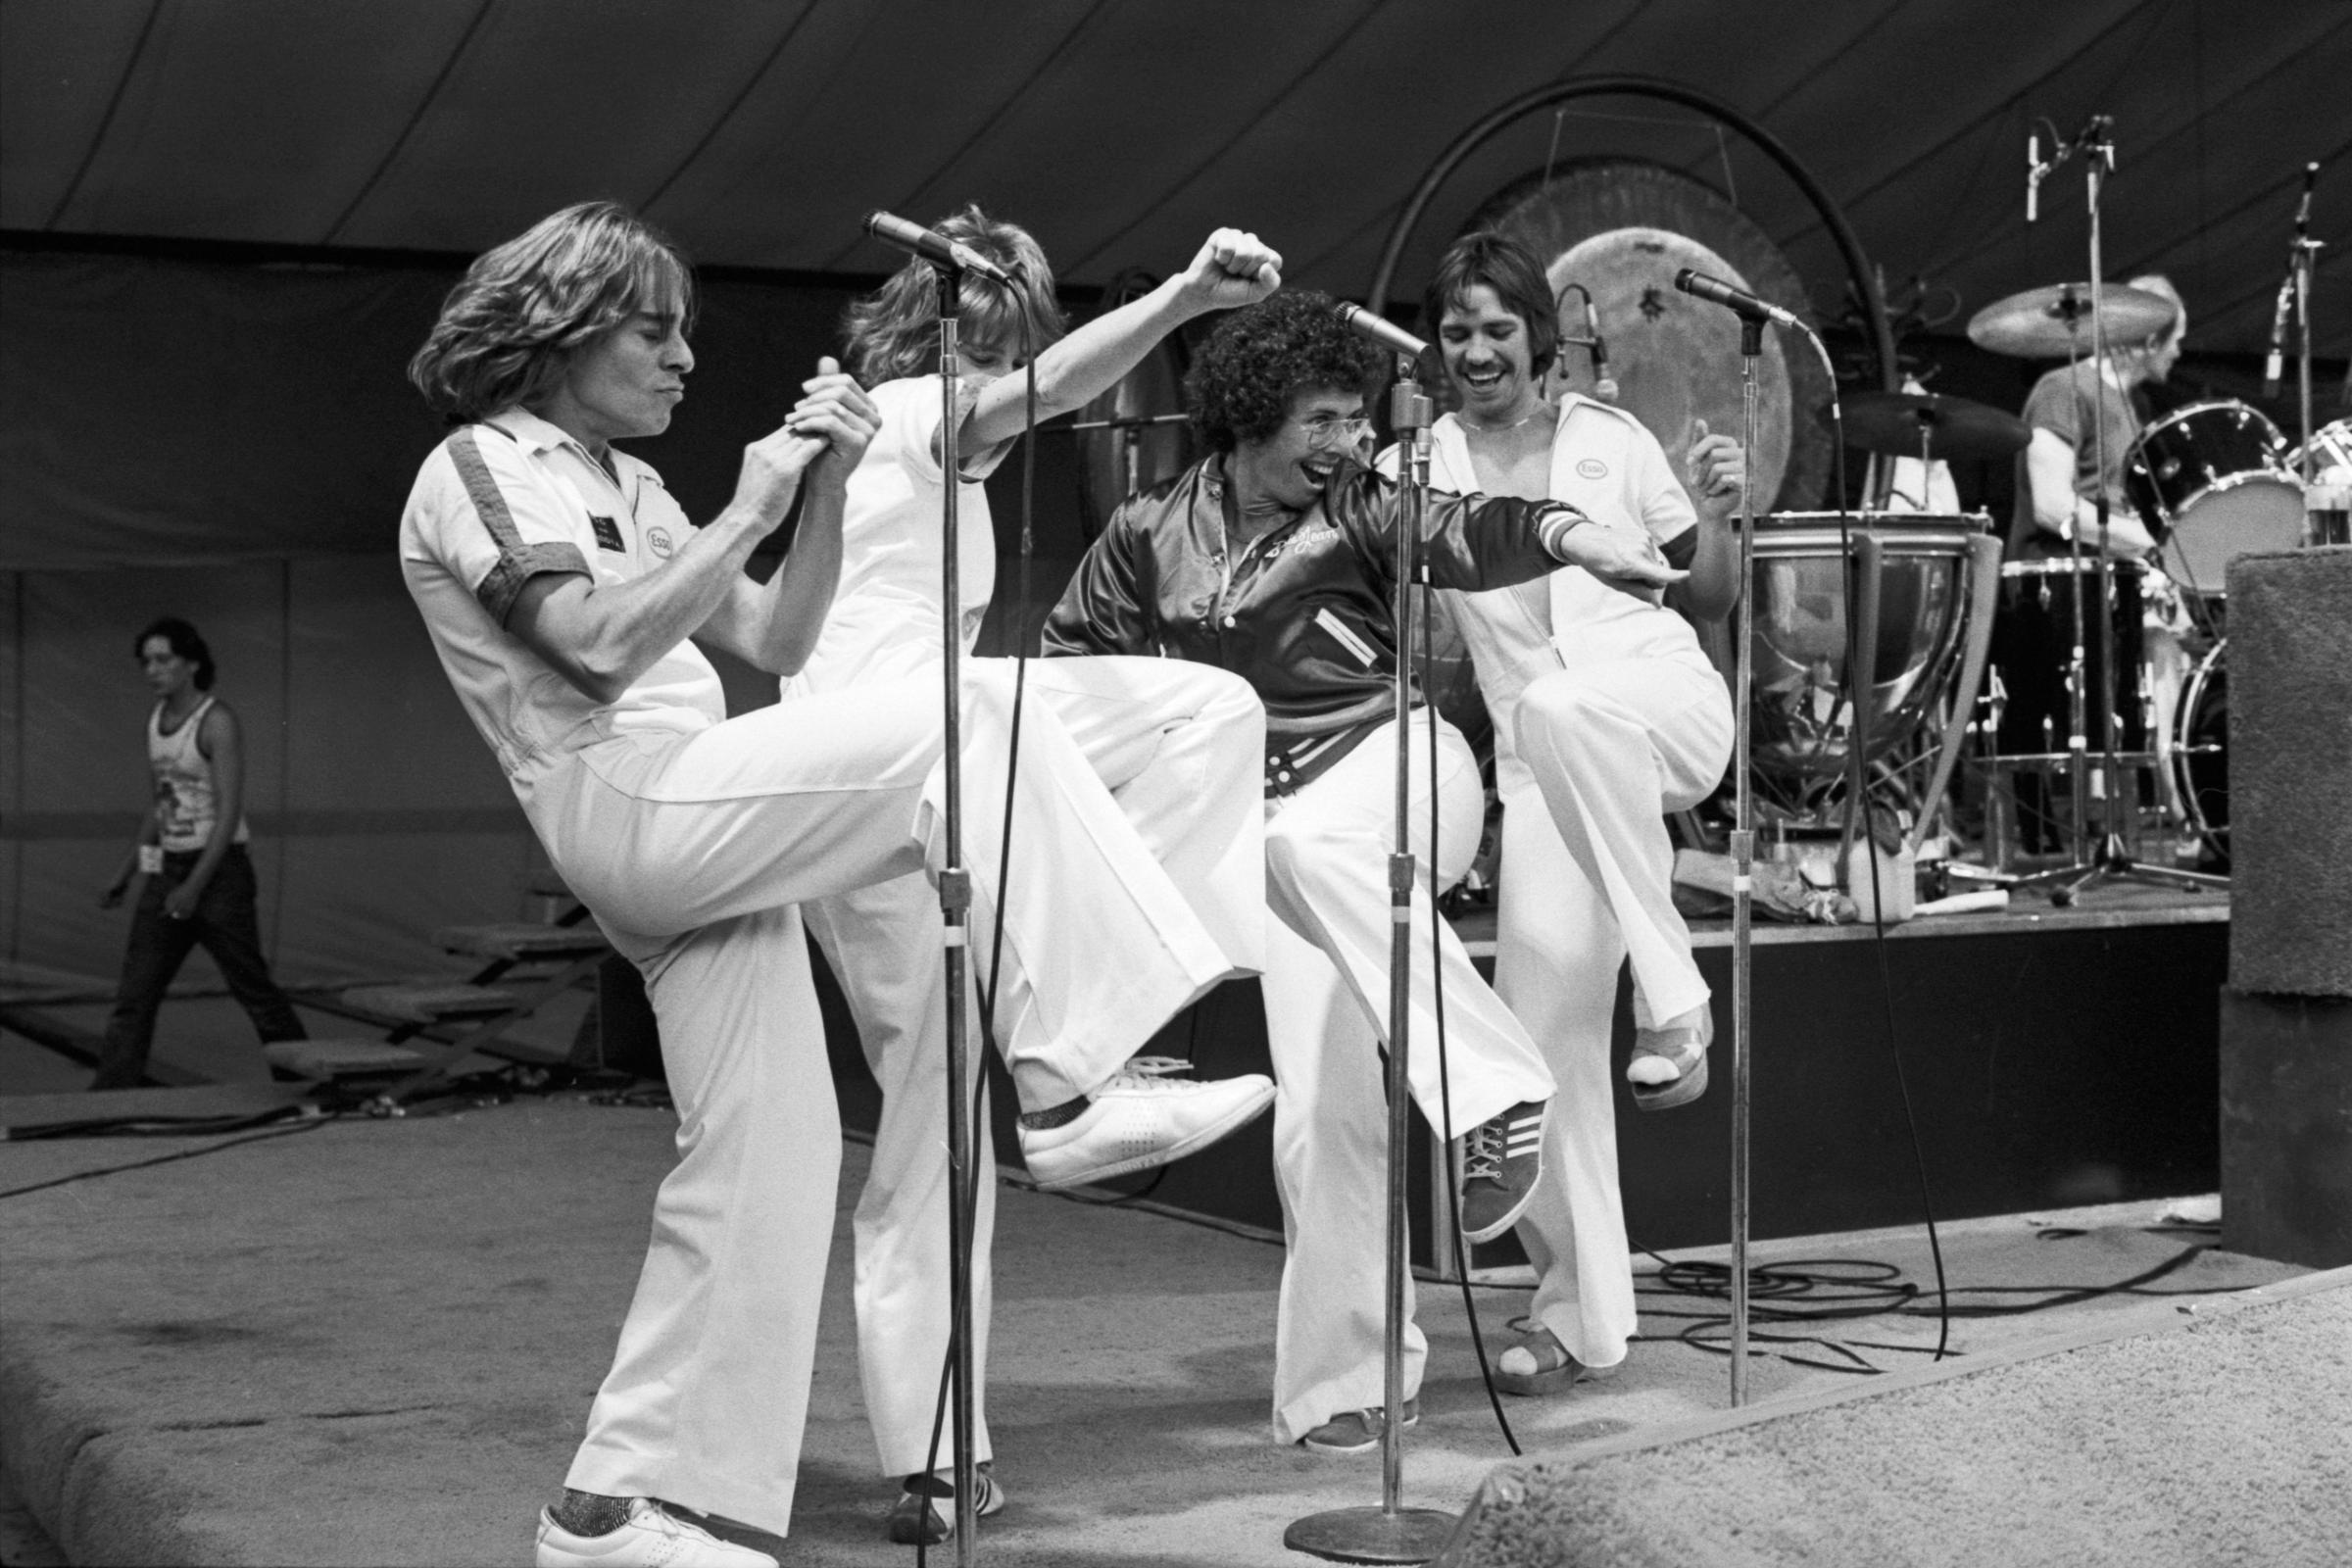 “I joined the backup vocalists – Jon Joyce, Cindy Bullens and Ken Gold – for several songs. We were all decked out in one-piece jumpsuits that looked like something a gas station attendant would wear. It was, after all, 1975 in all its glory!” –Billie Jean King